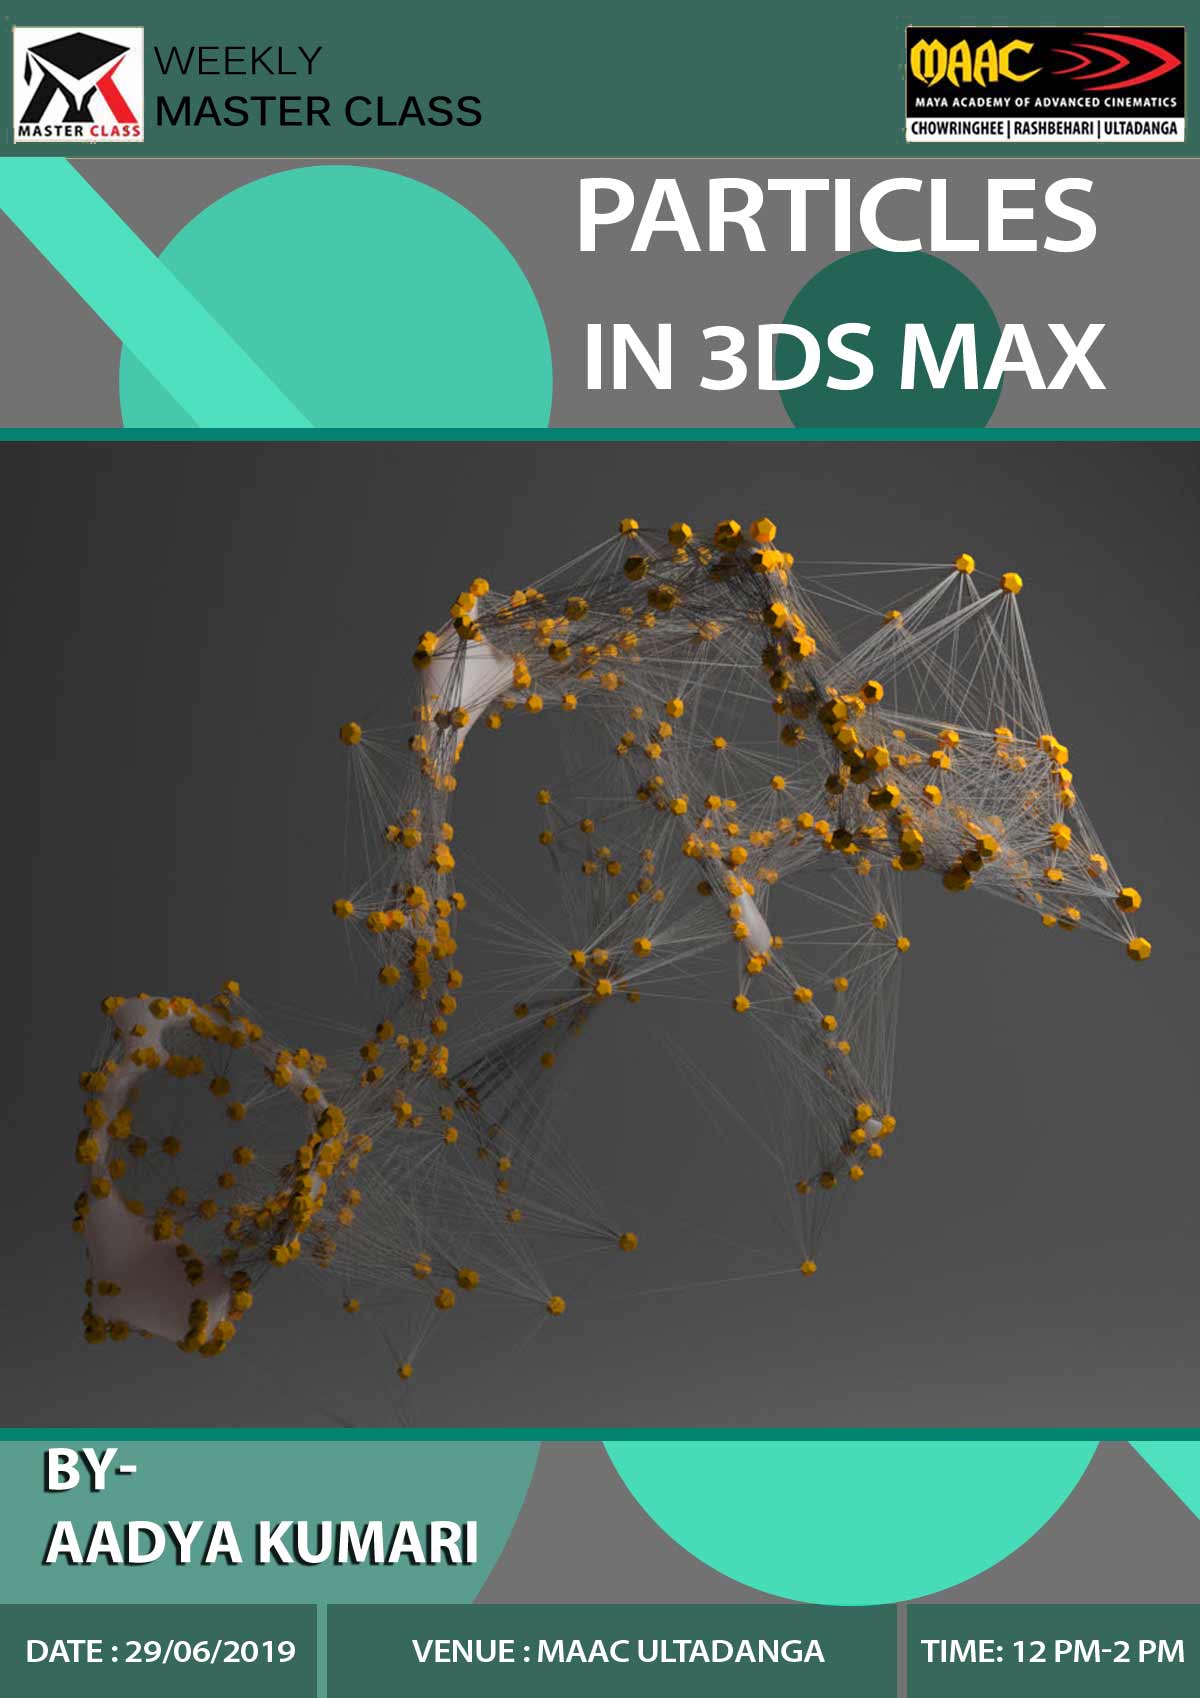 Weekly Master Class on Particles in 3Ds Max